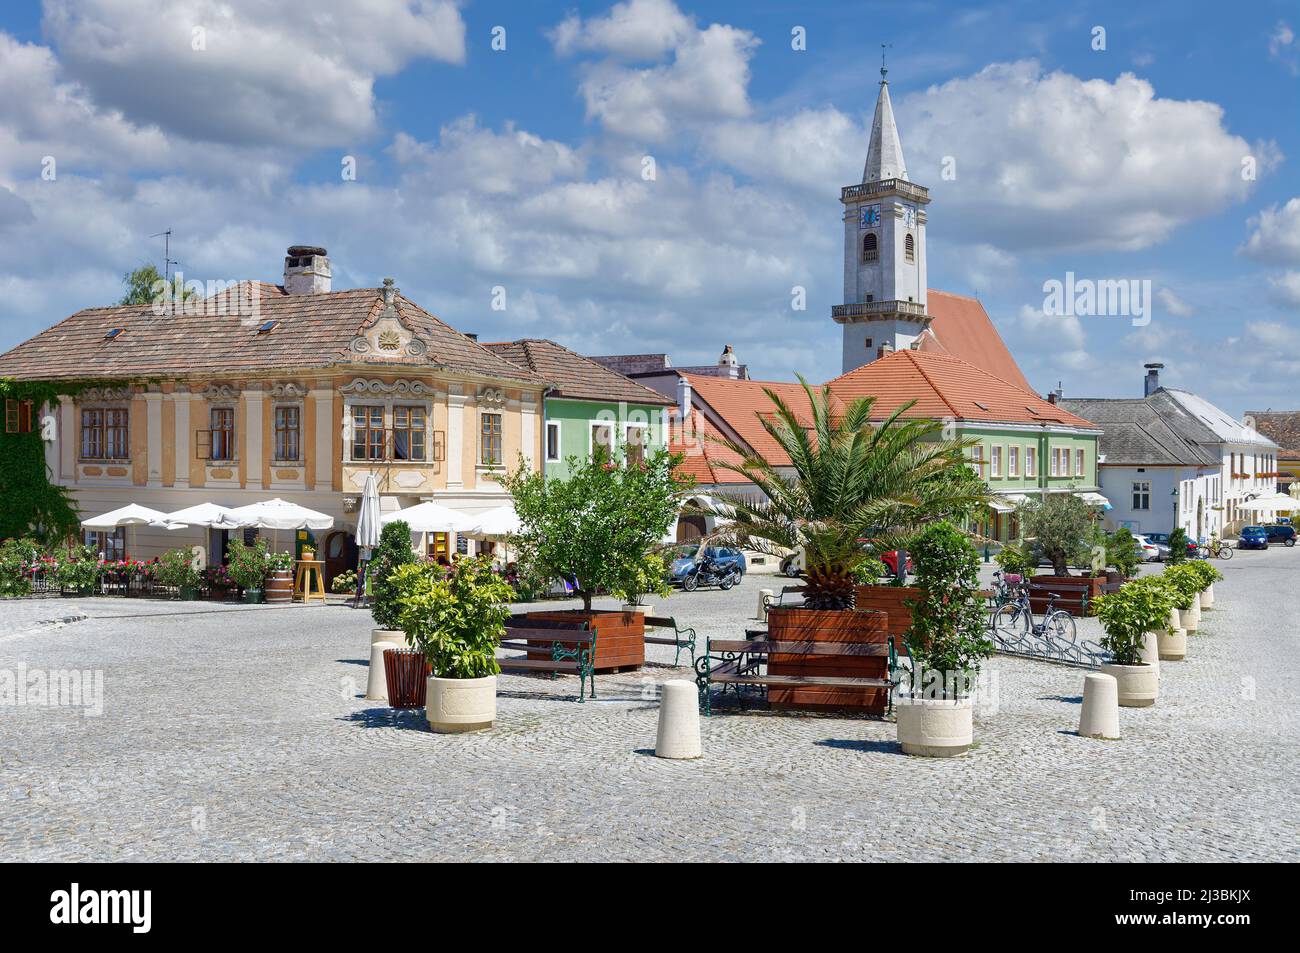 market place in Village of Rust at Lake Neusiedler See,Burgenland,Austria Stock Photo